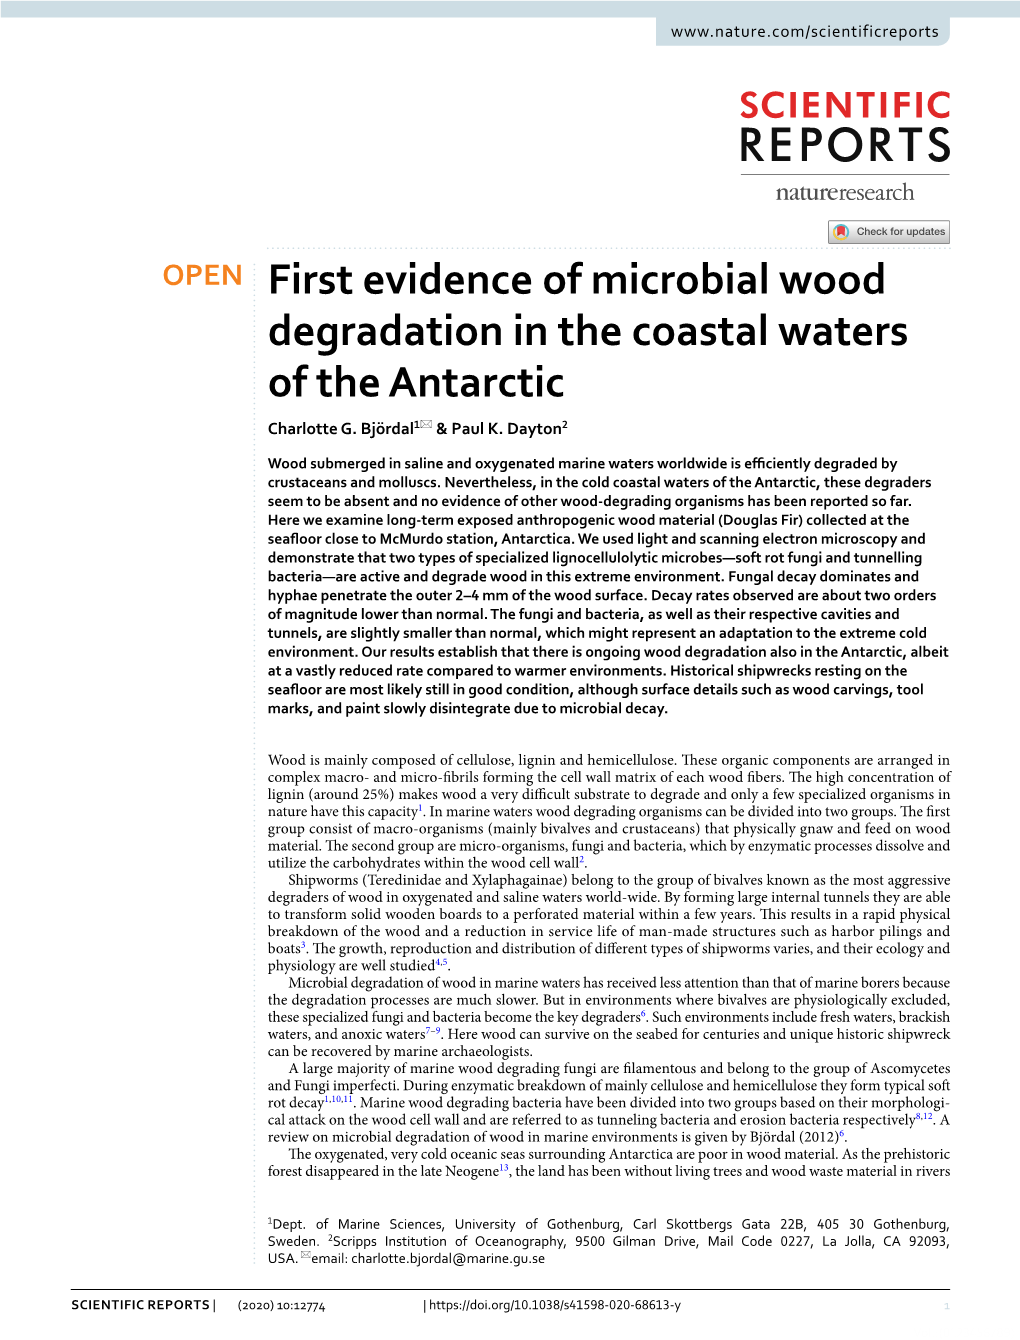 First Evidence of Microbial Wood Degradation in the Coastal Waters of the Antarctic Charlotte G